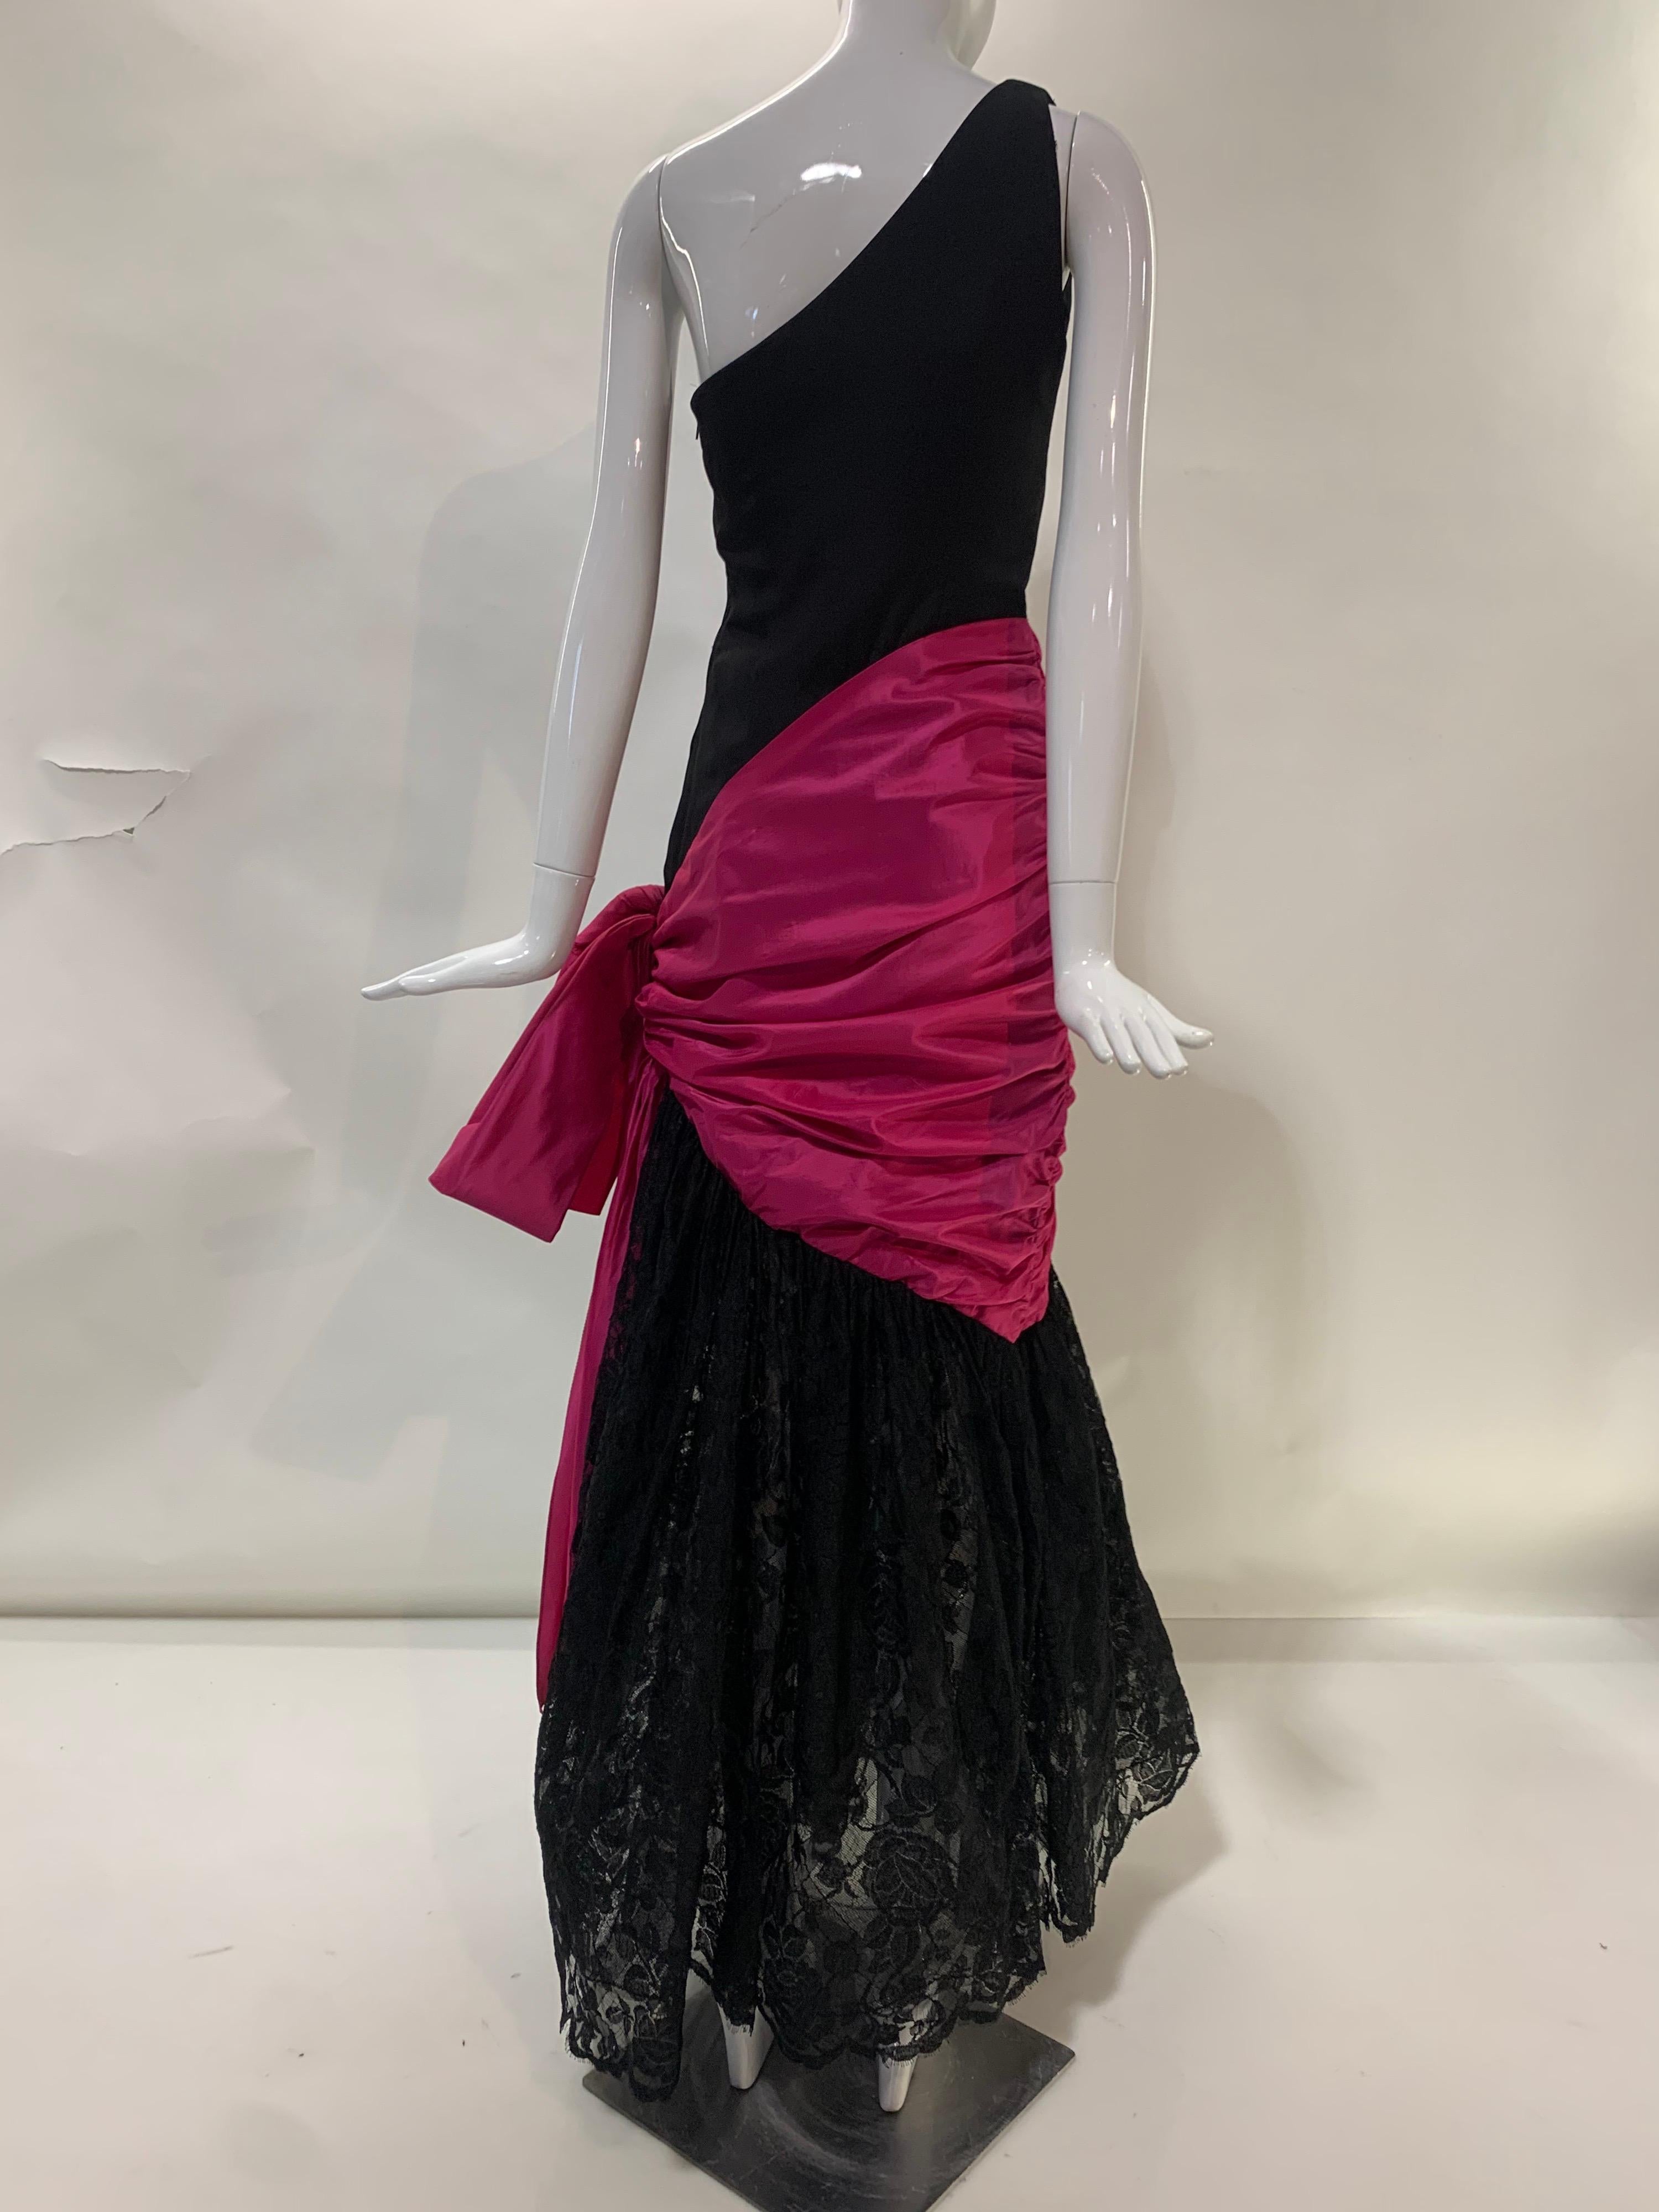 1980 Bill Blass Black Silk Crepe One-Shoulder Gown w/ Lace Skirt and Fuchsia Bow For Sale 4